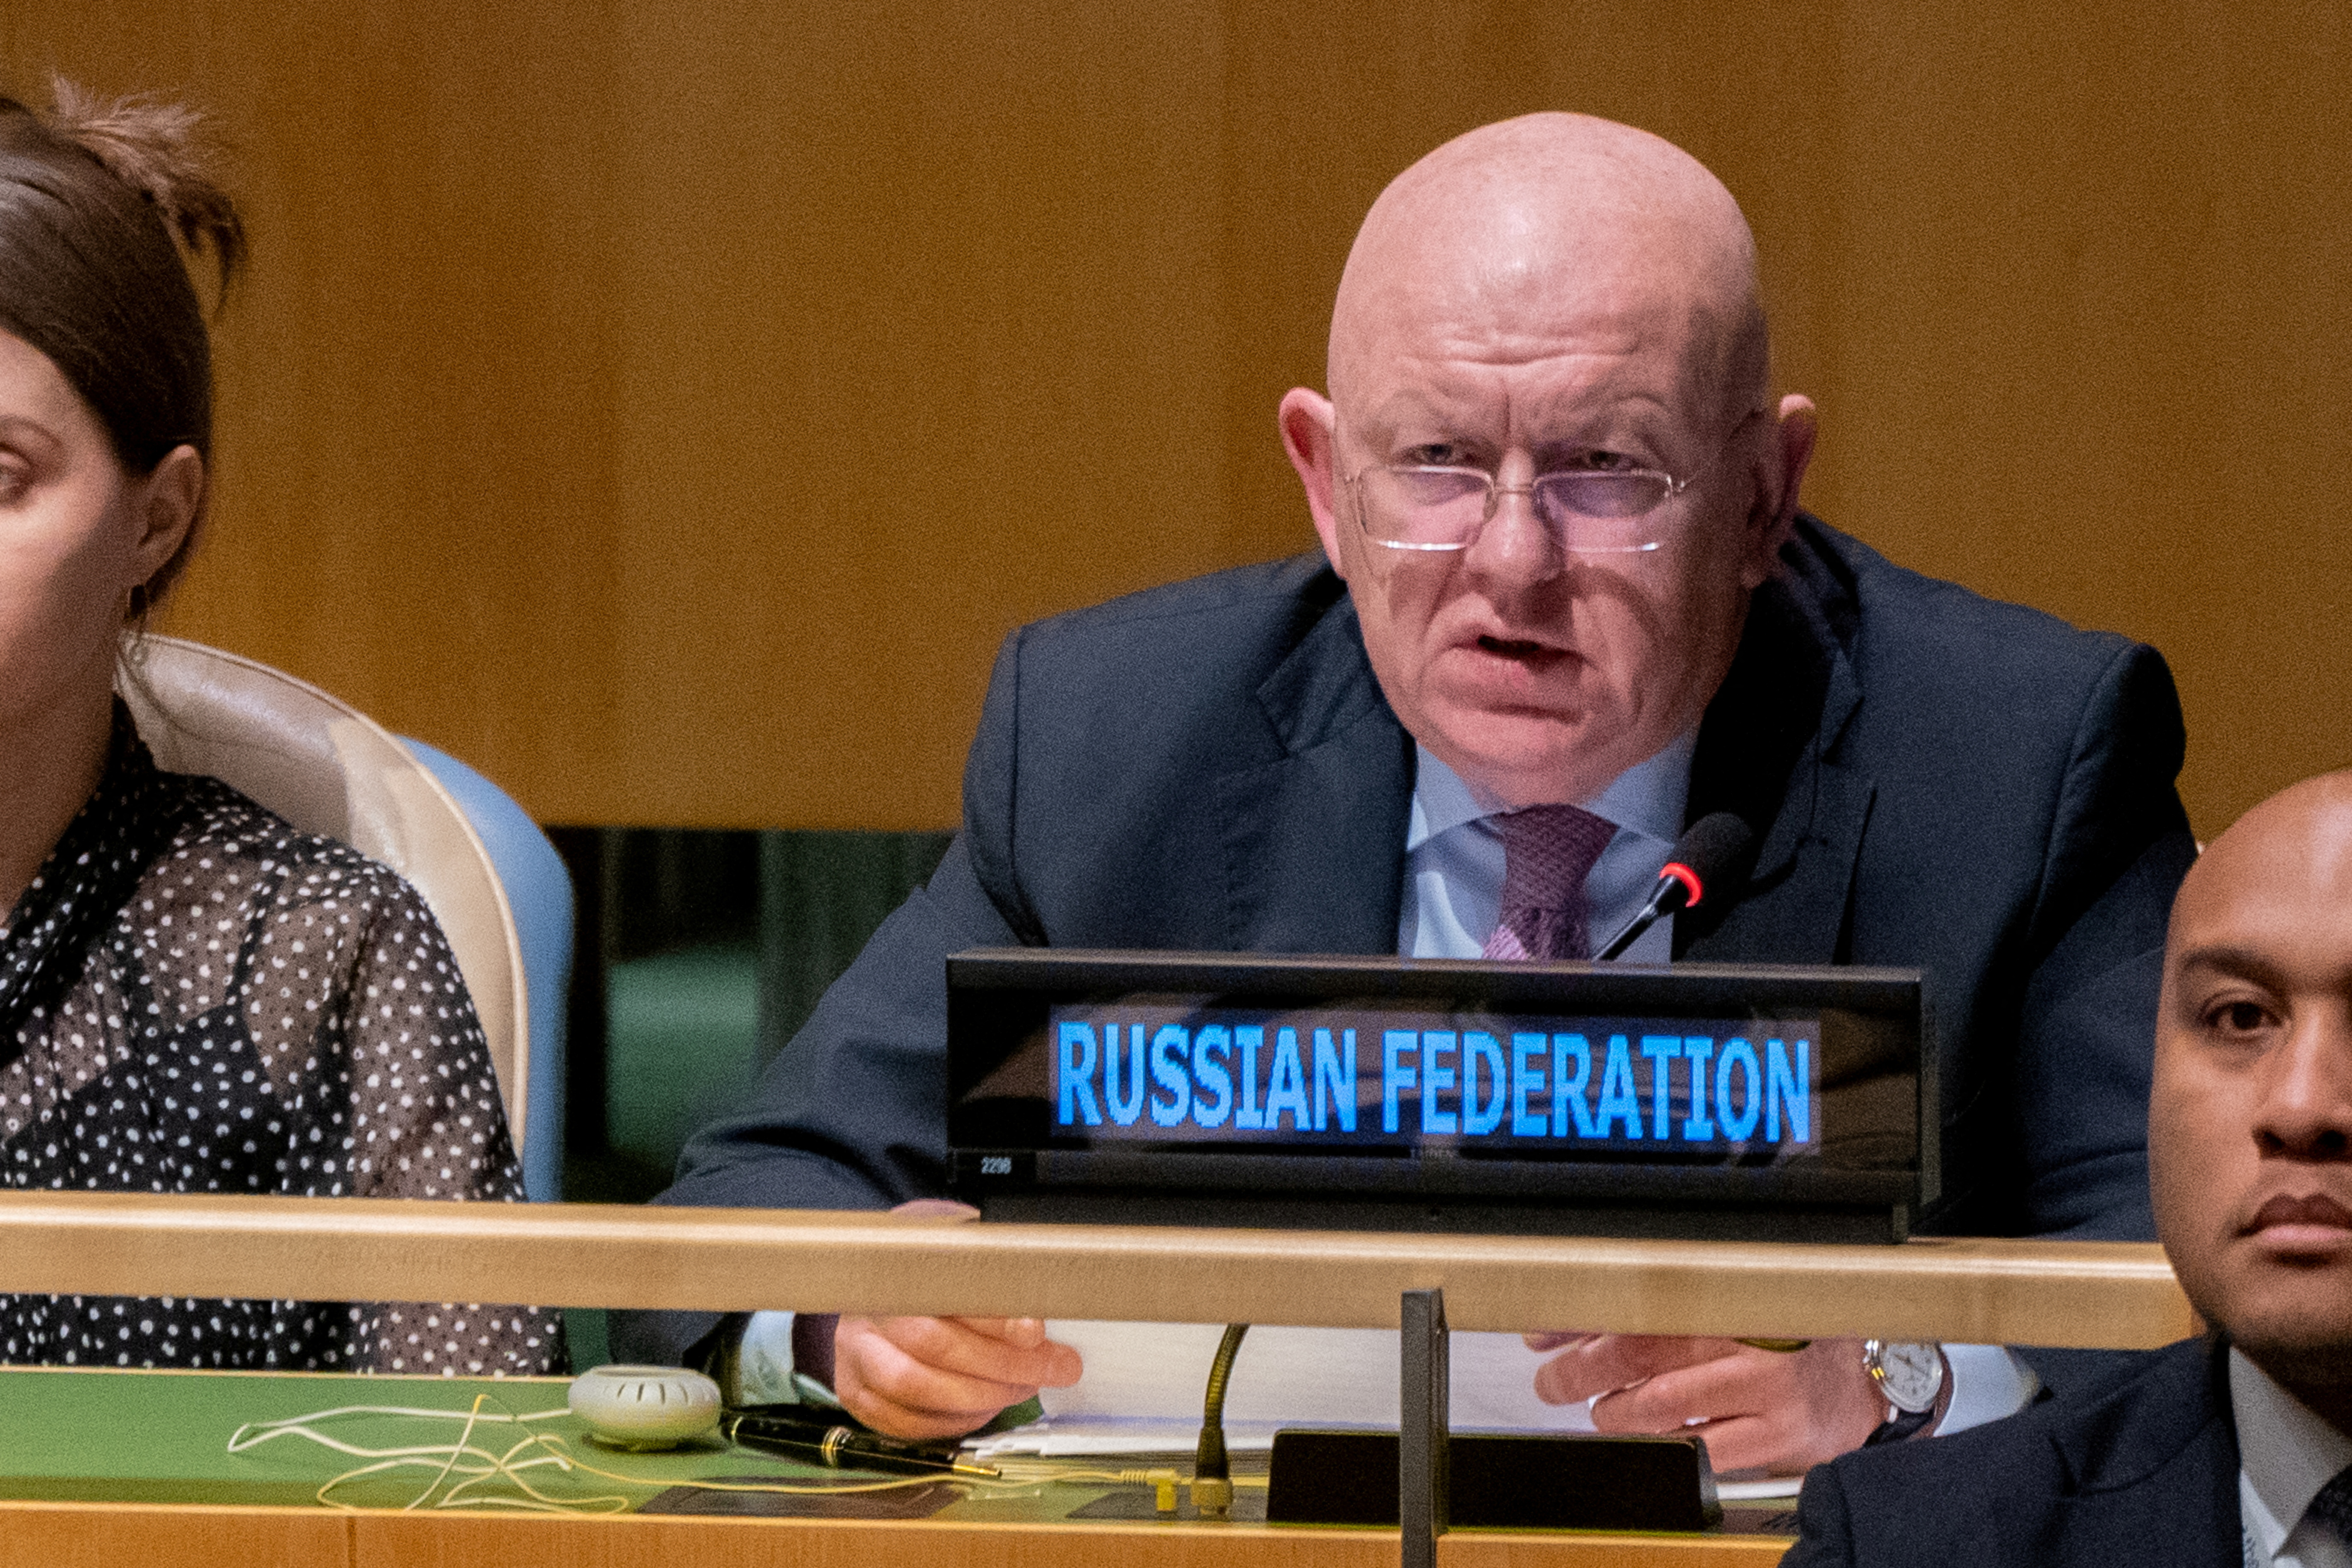 Russian Ambassador to the U.N. Vassily Nebenzia address members of the general assembly prior to a vote on a resolution condemning the annexation of parts of Ukraine amid Russia's invasion of Ukraine, at the United Nations Headquarters